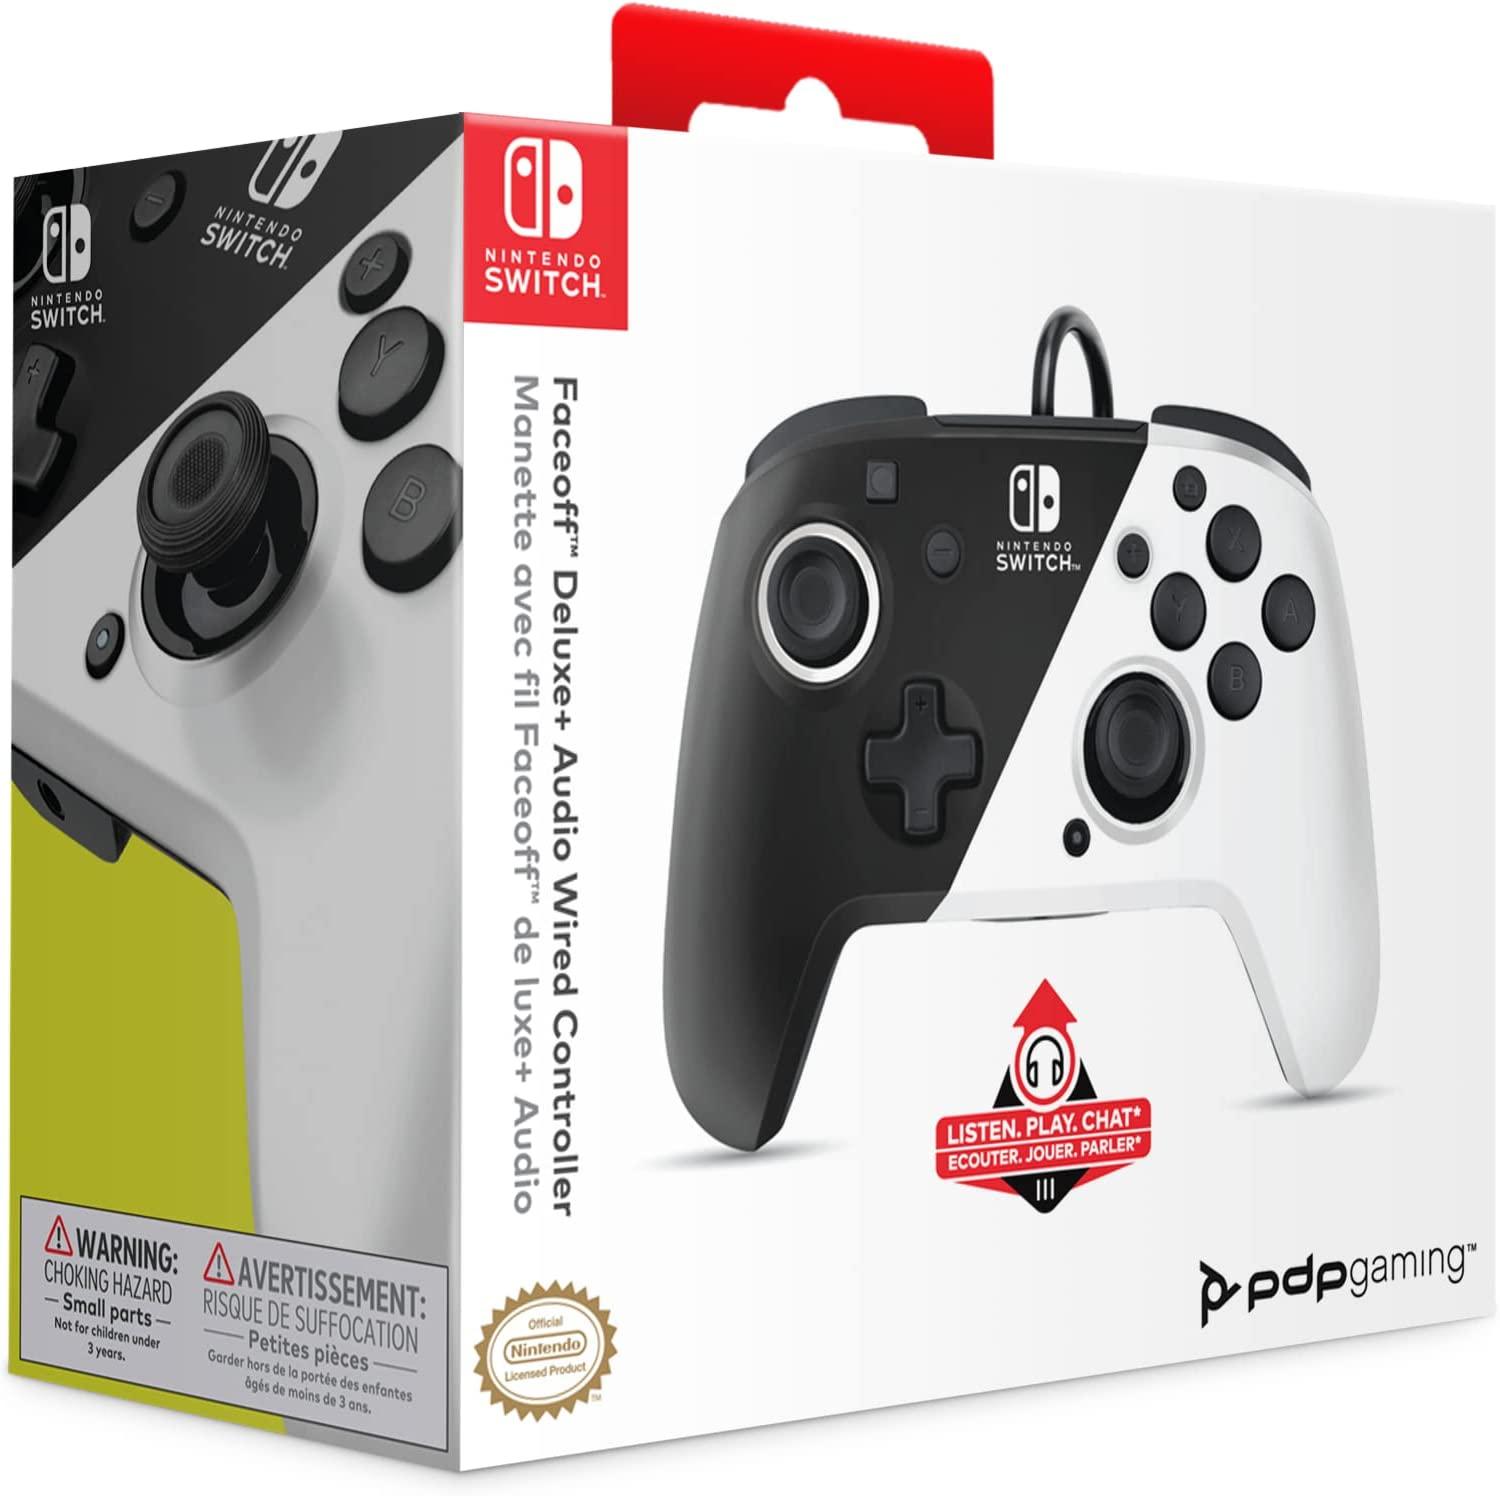 Selected image for PDP Džojstik za Nintendo Switch sa audiom Faceoff Deluxe Black & White